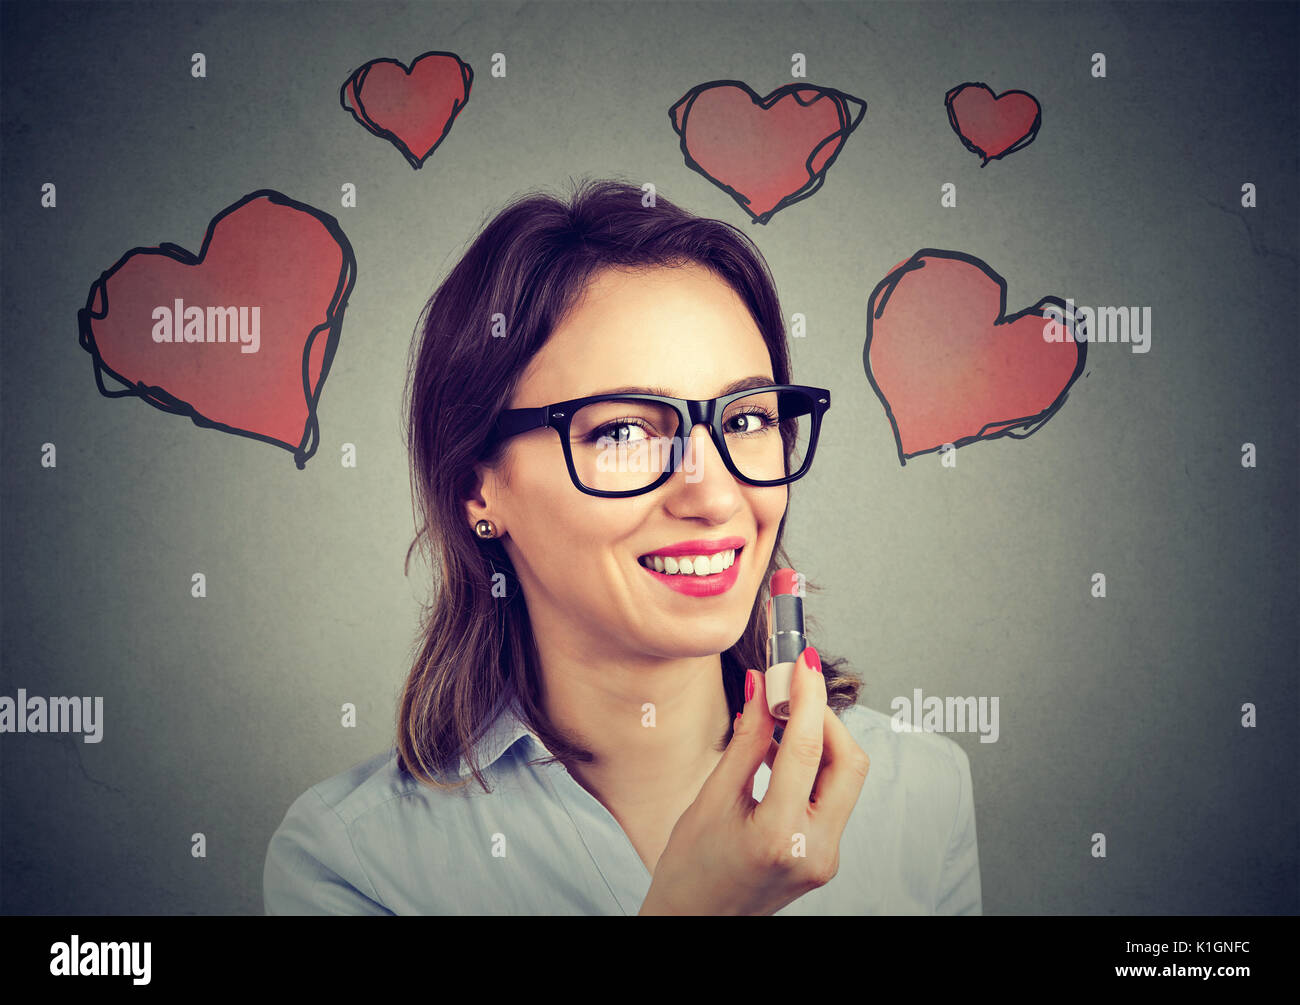 Young woman in love with red lipstick Stock Photo